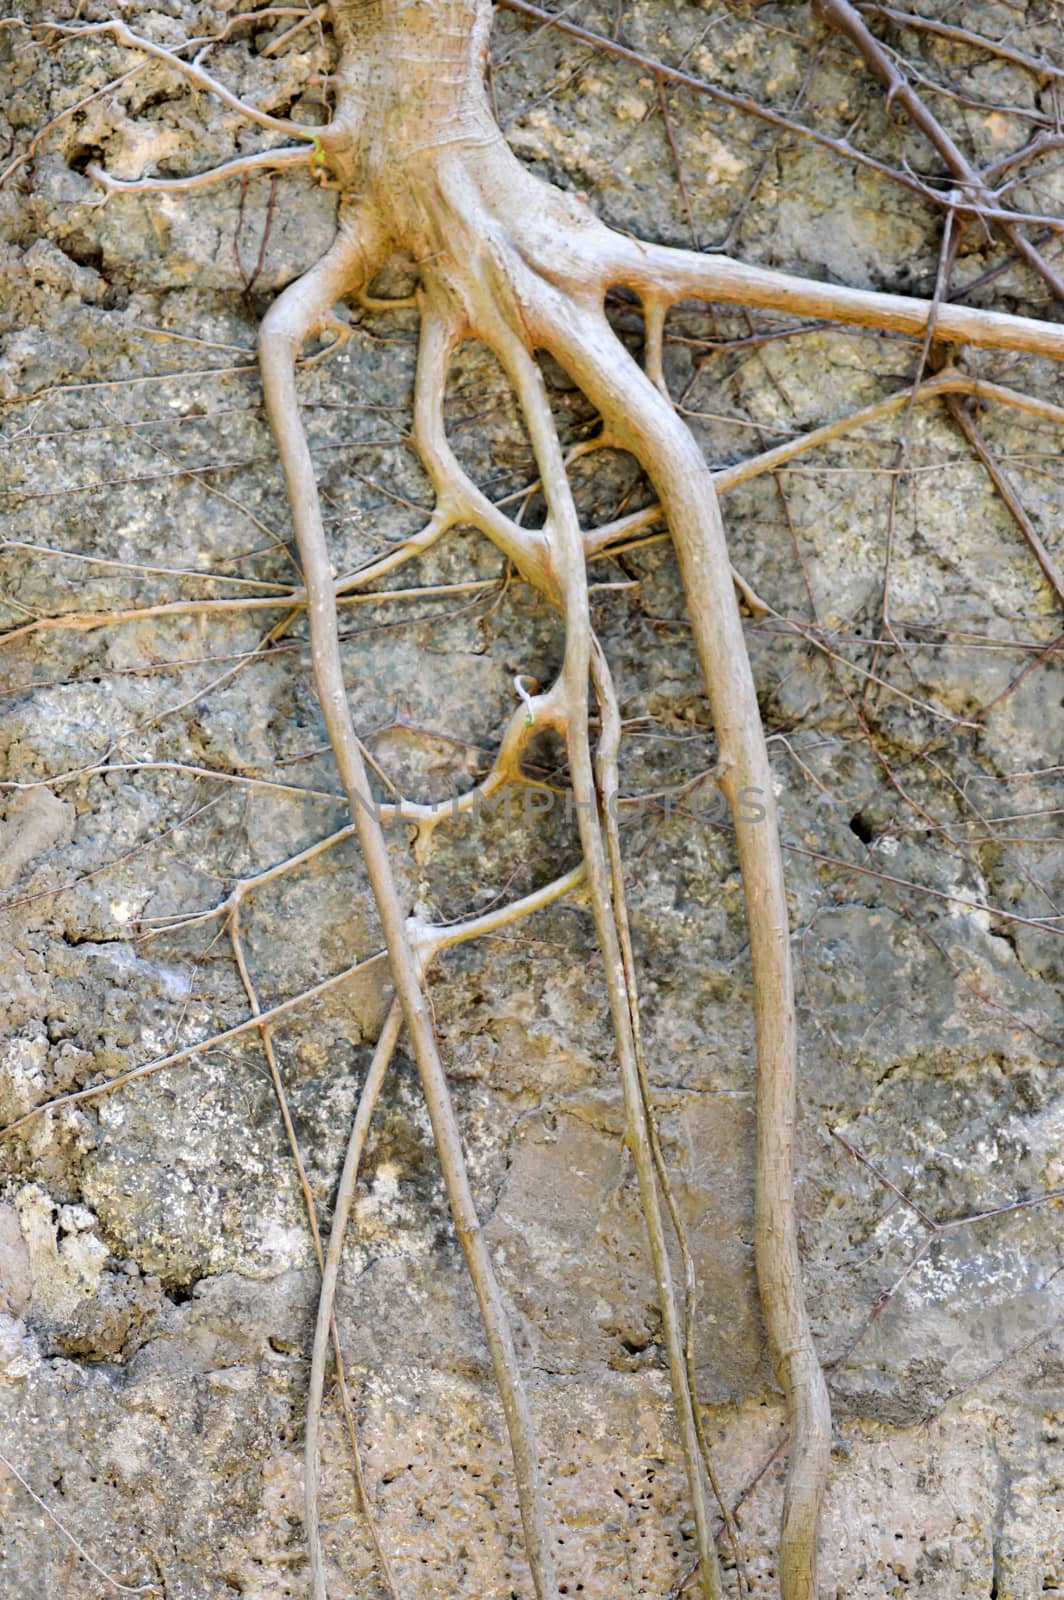 Root clumps of a shrub colonizing a stone wall in Kenya